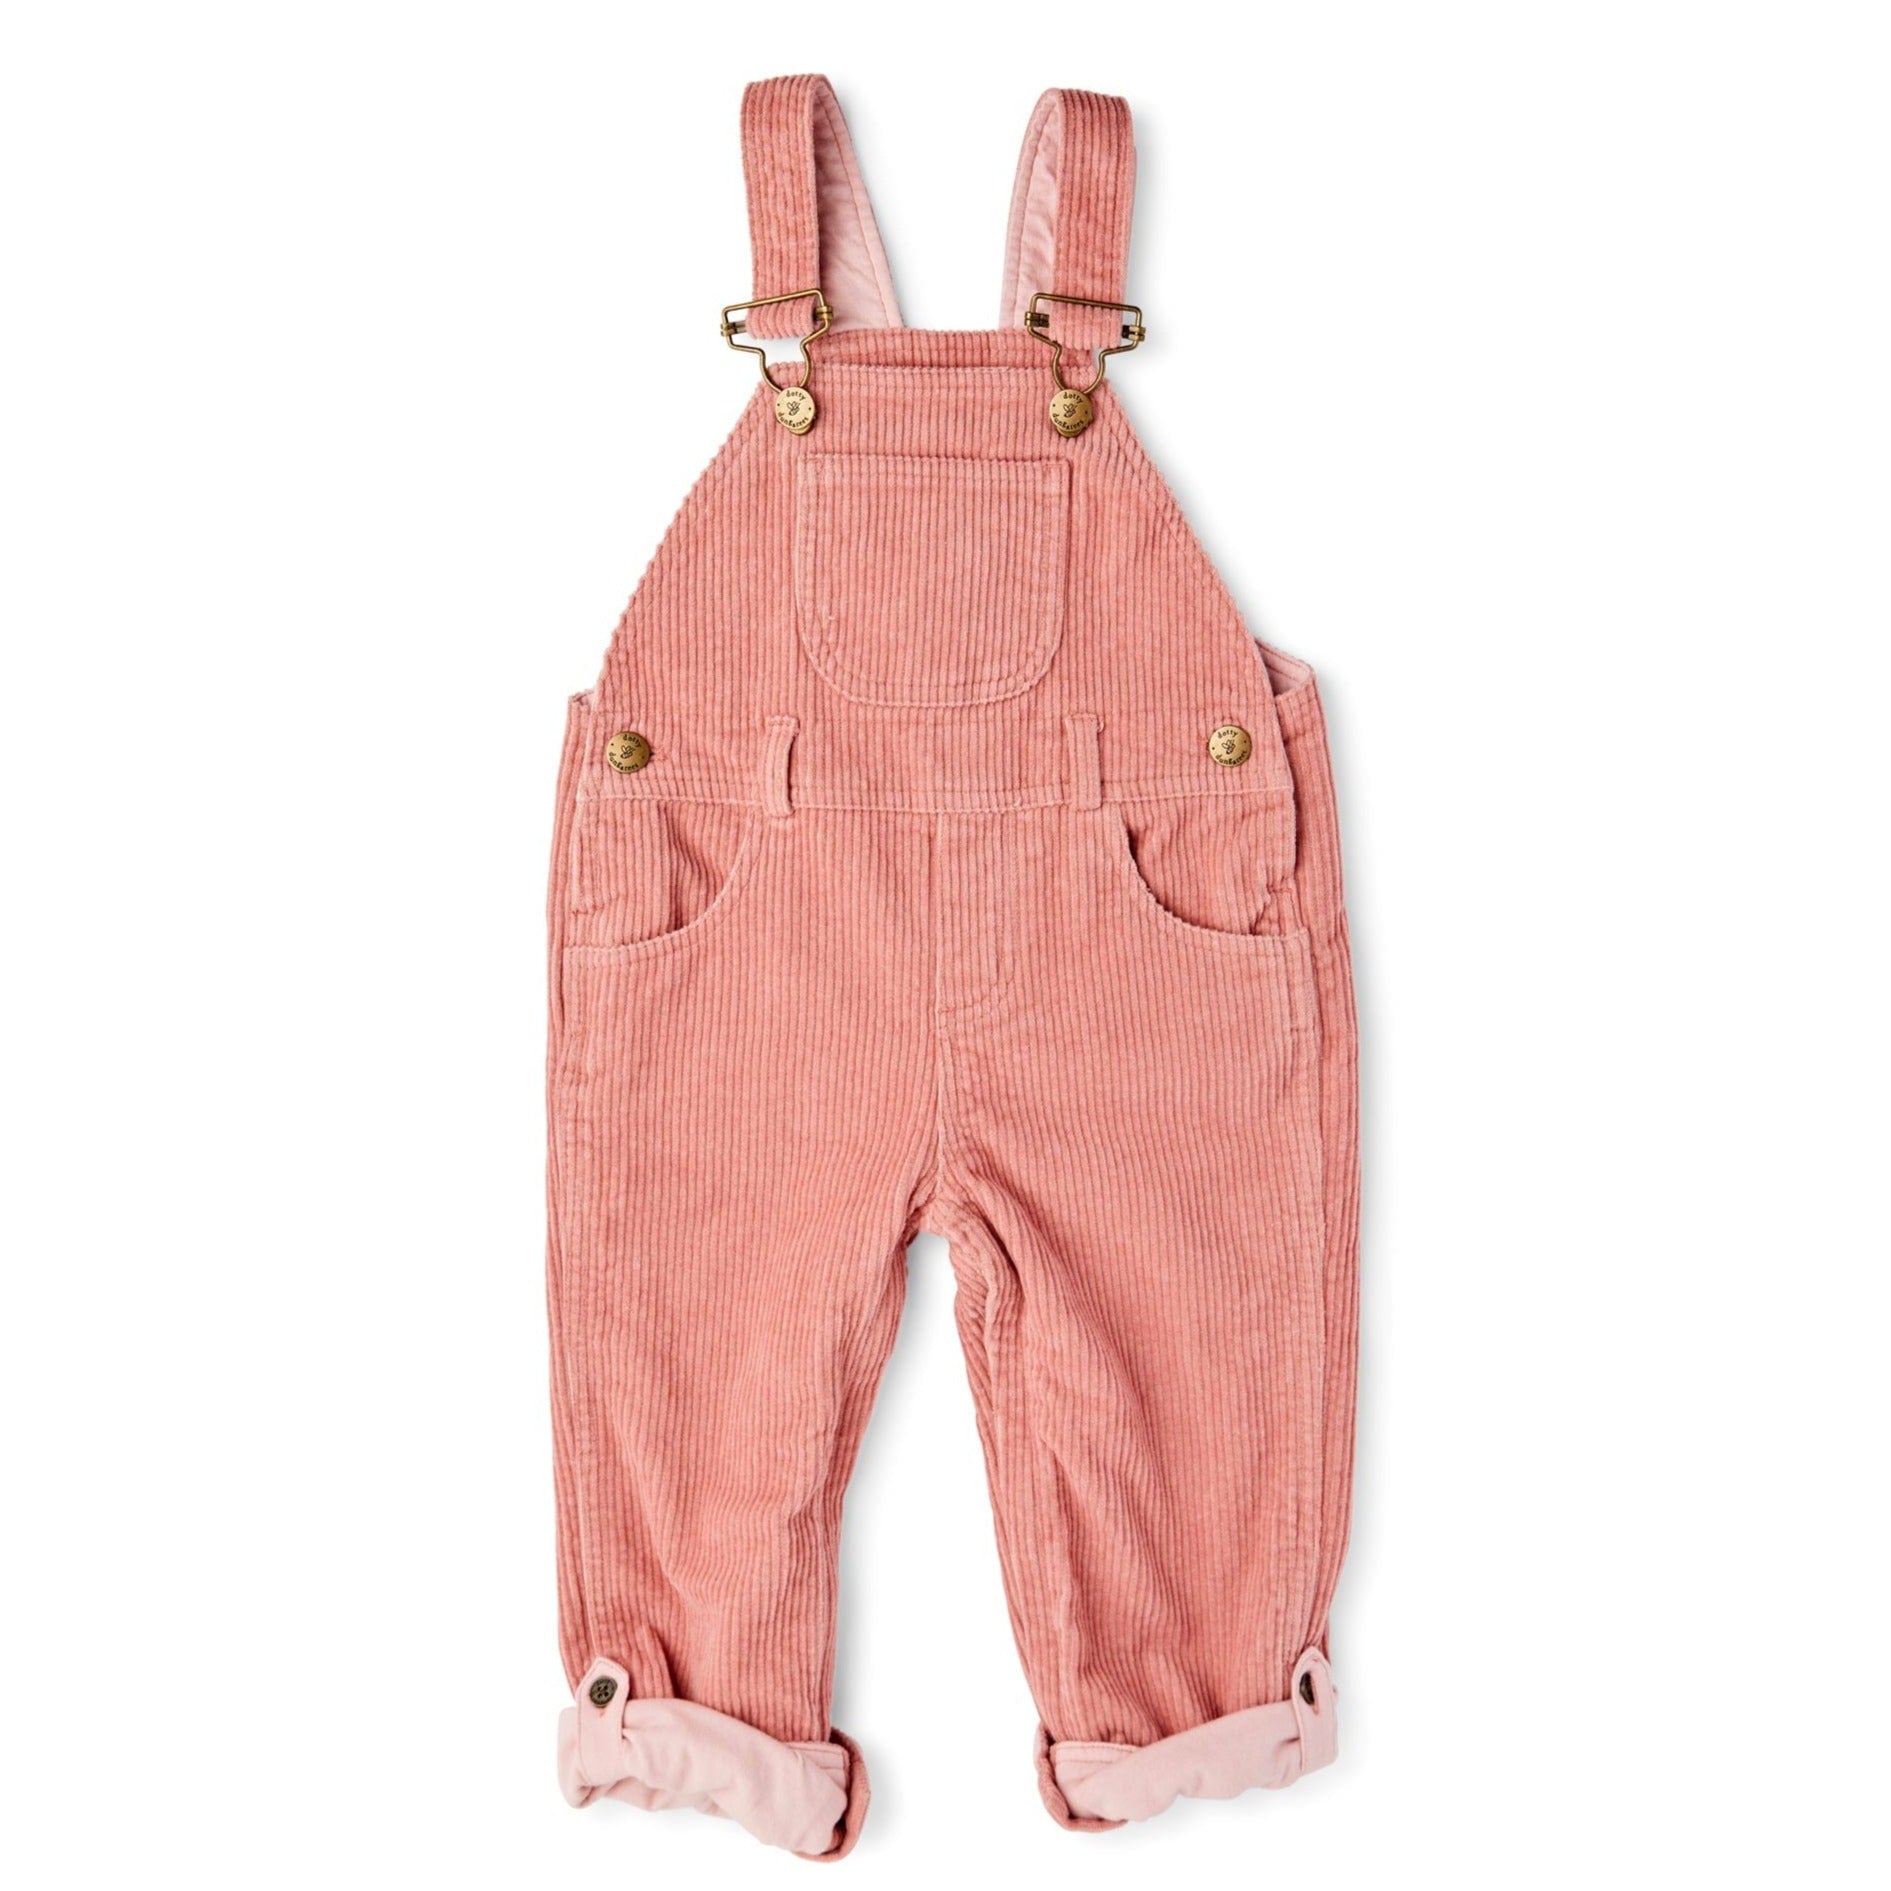 Dotty Dungarees Pink Chunky Cord Children's Dungarees